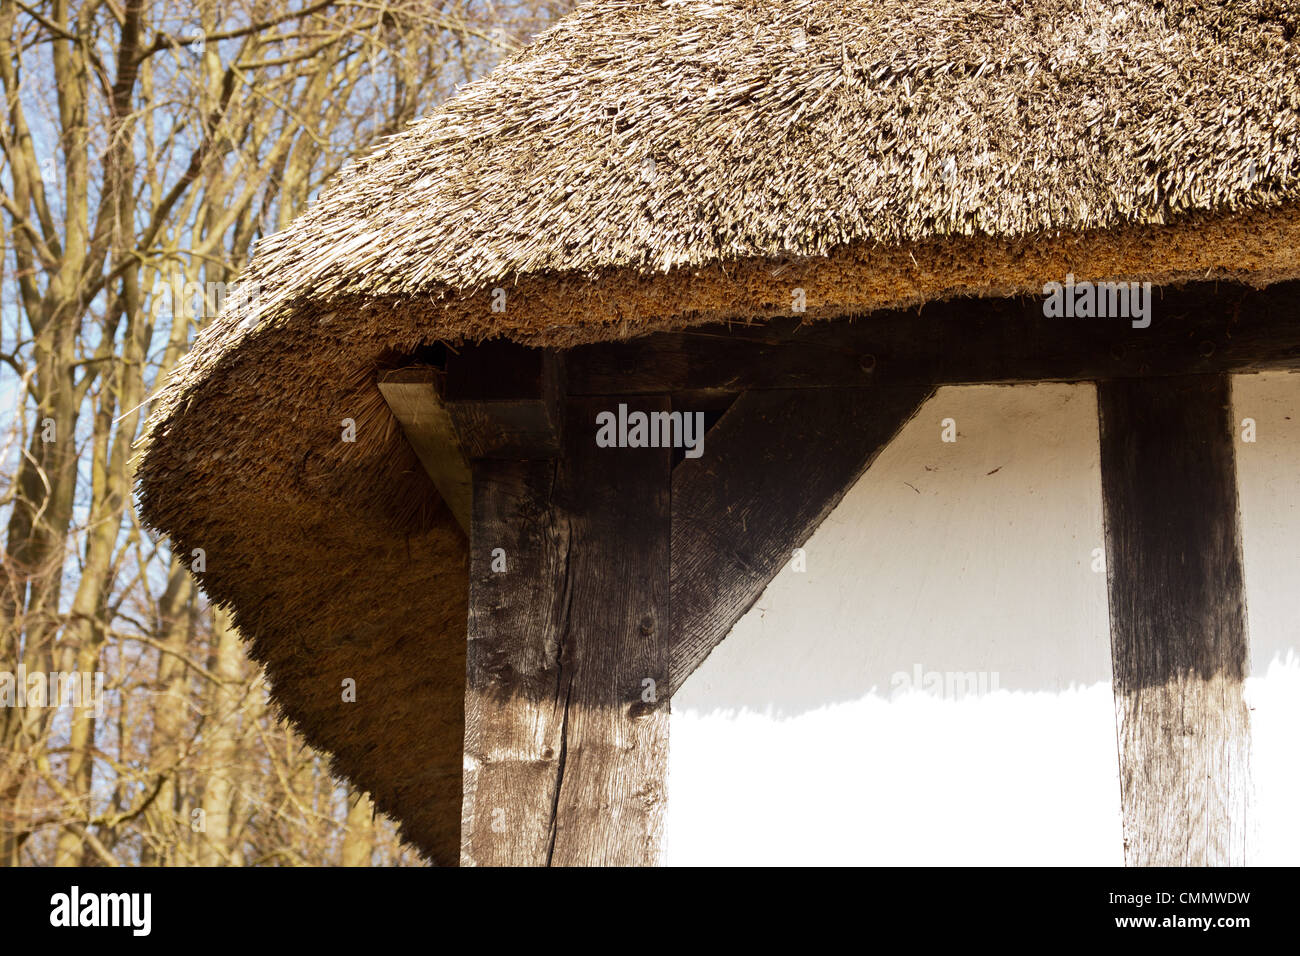 Thatched farm house originally built in 1678, timber framed construction, now sited at St Fagans national history museum. Stock Photo